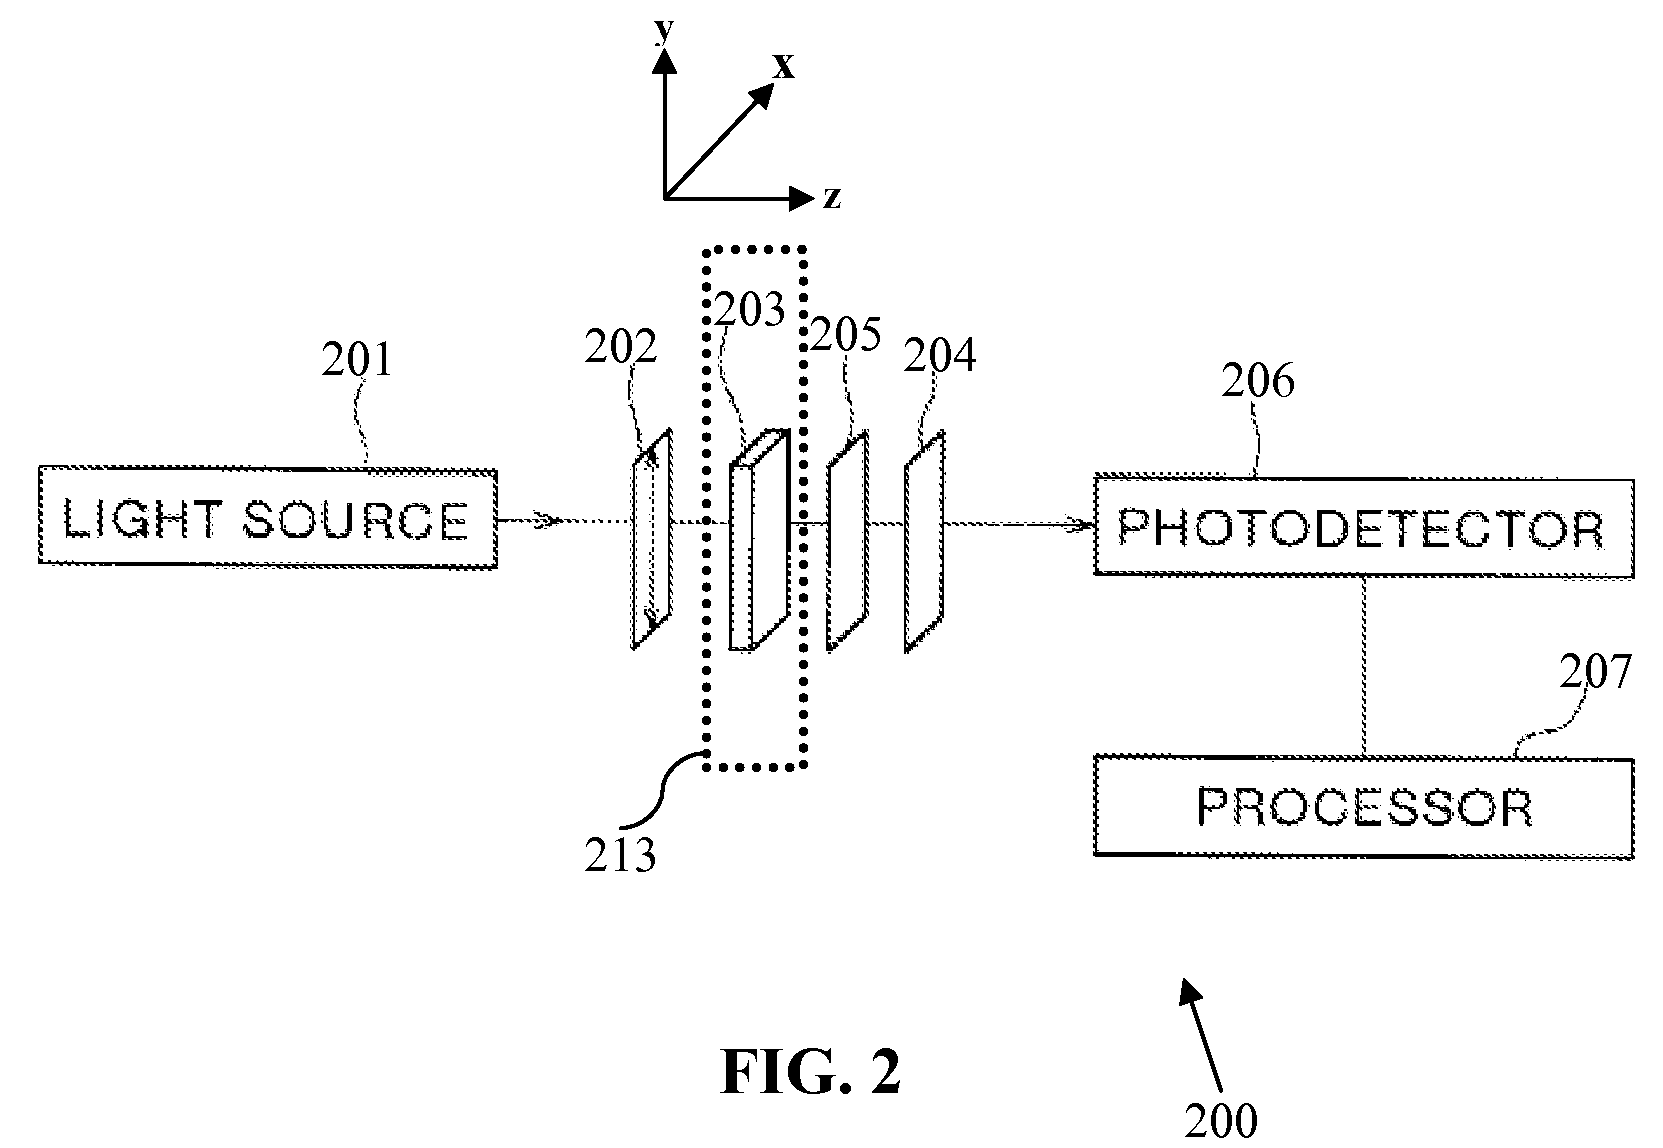 System and method for characterizing fibrous materials using stokes parameters